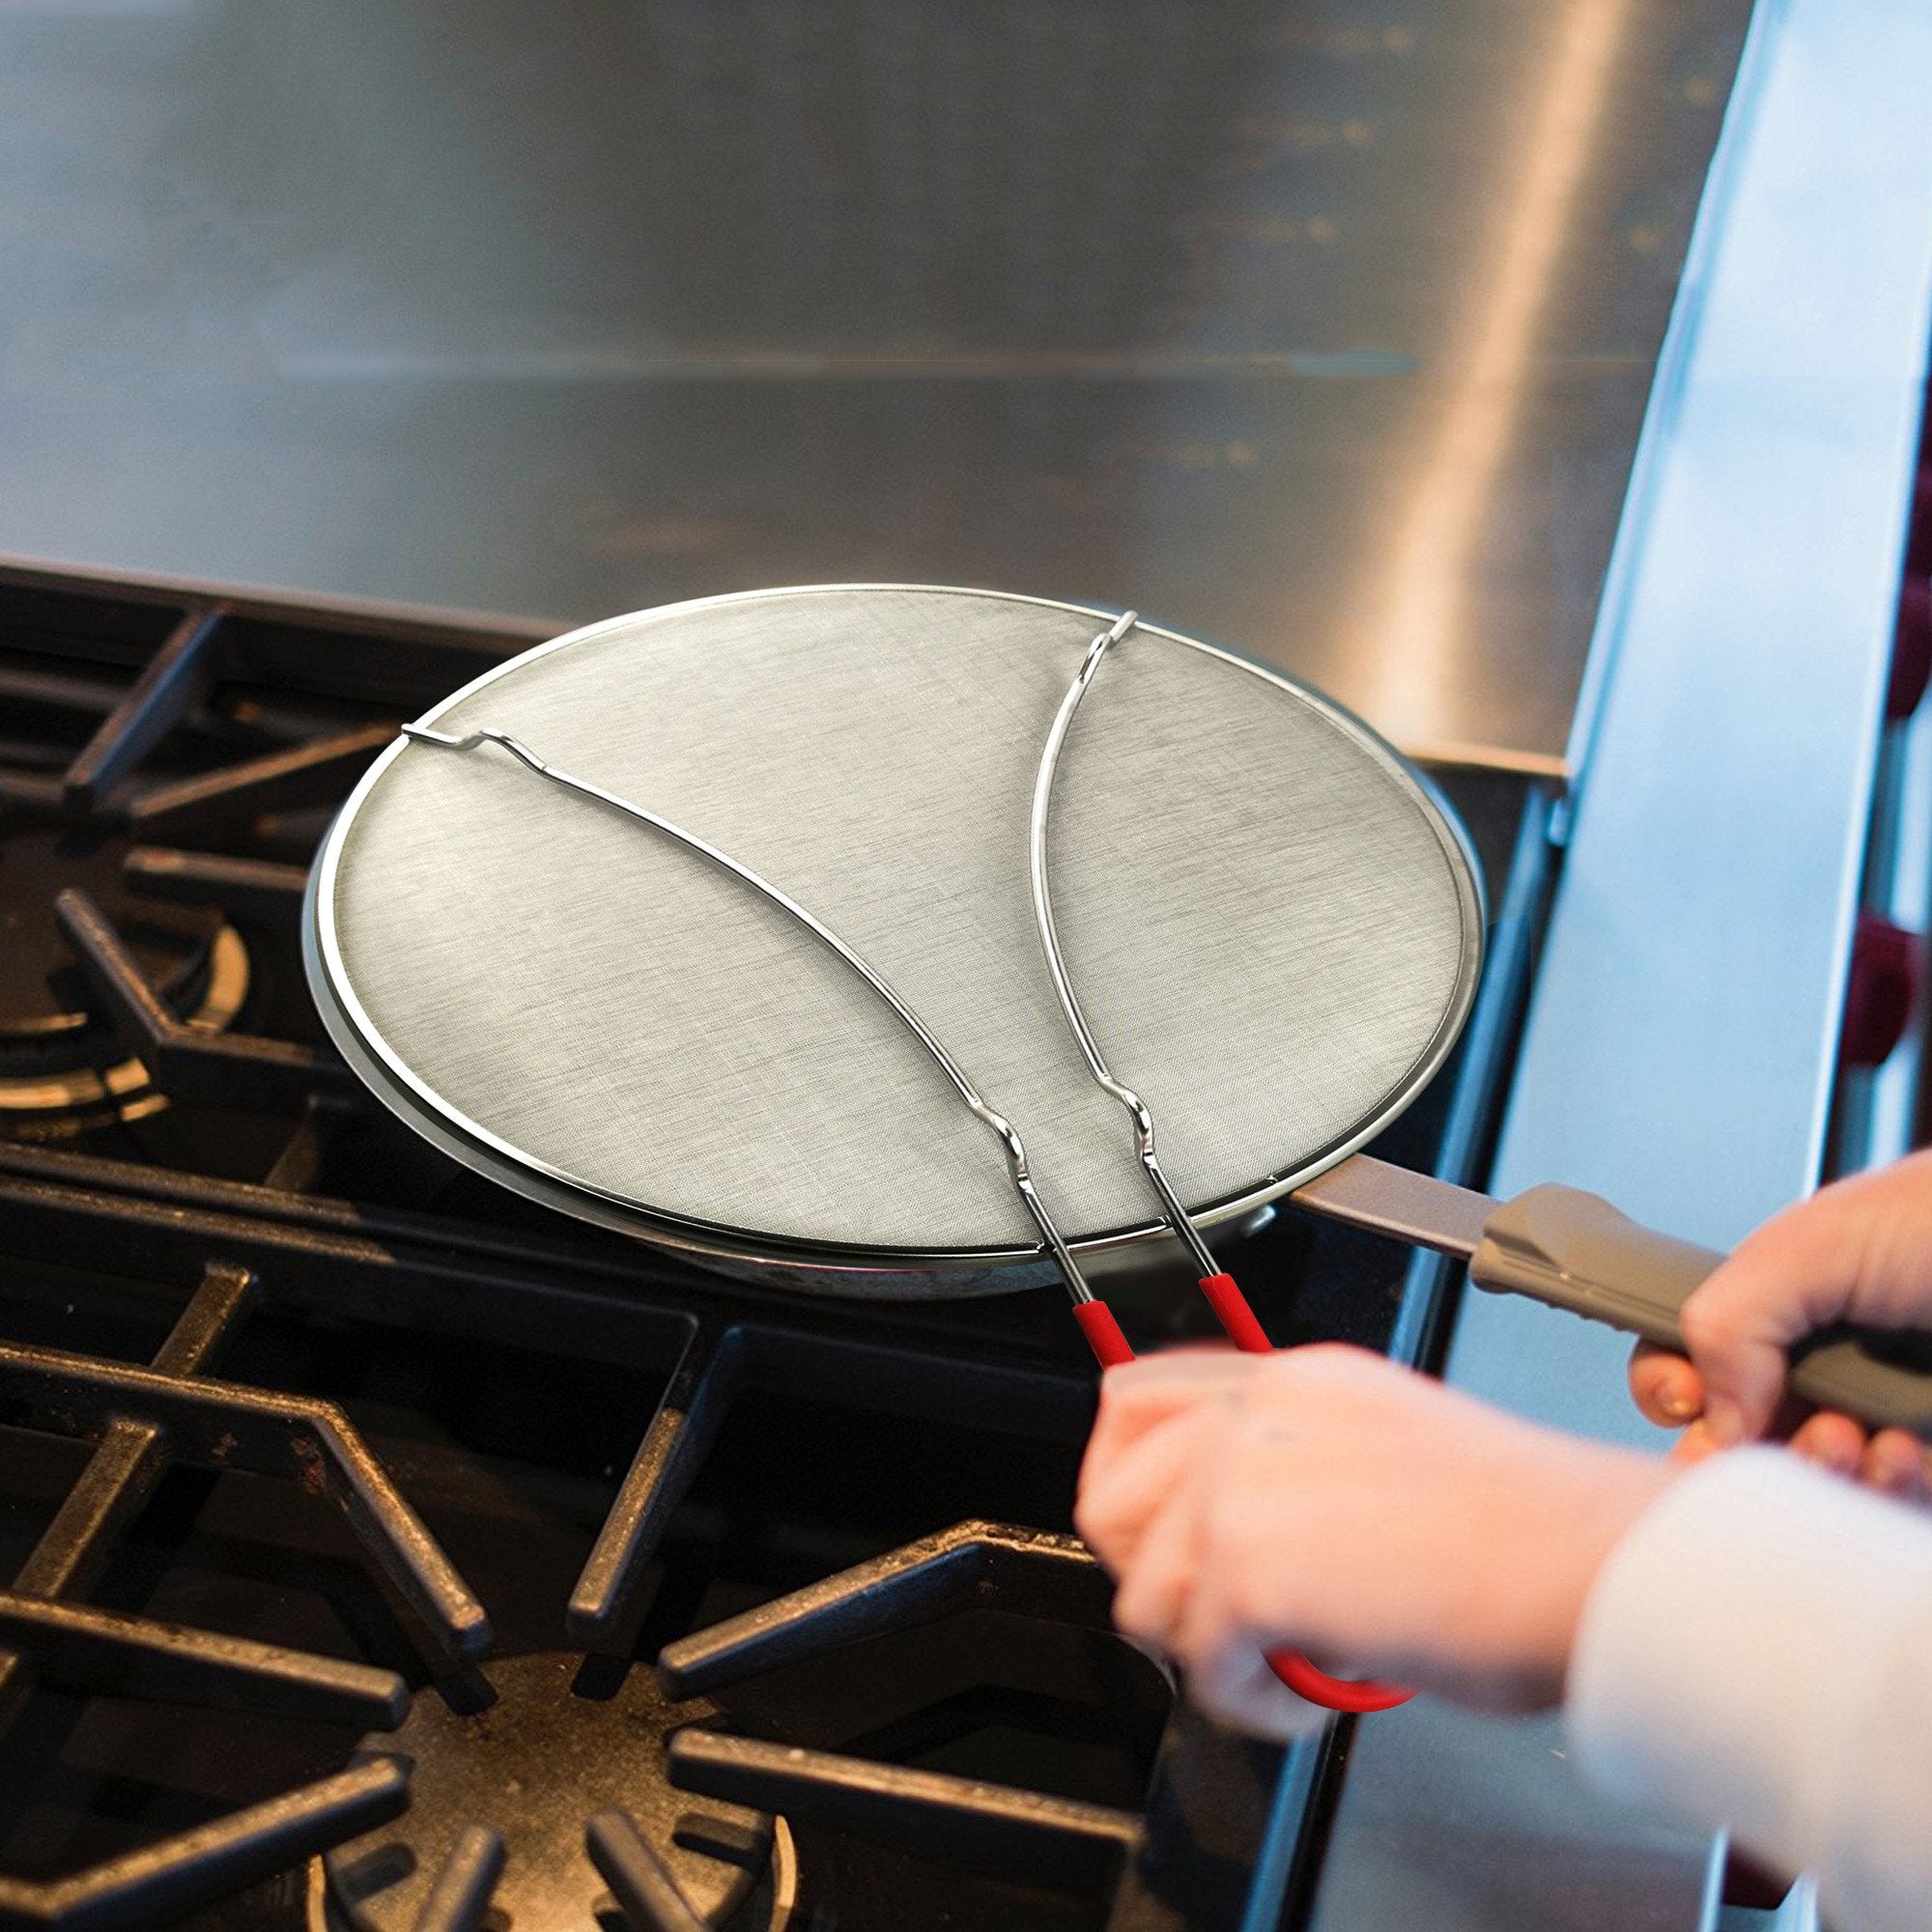 The True 13 Oven Safe Silicone Splatter Screen for Frying Pan